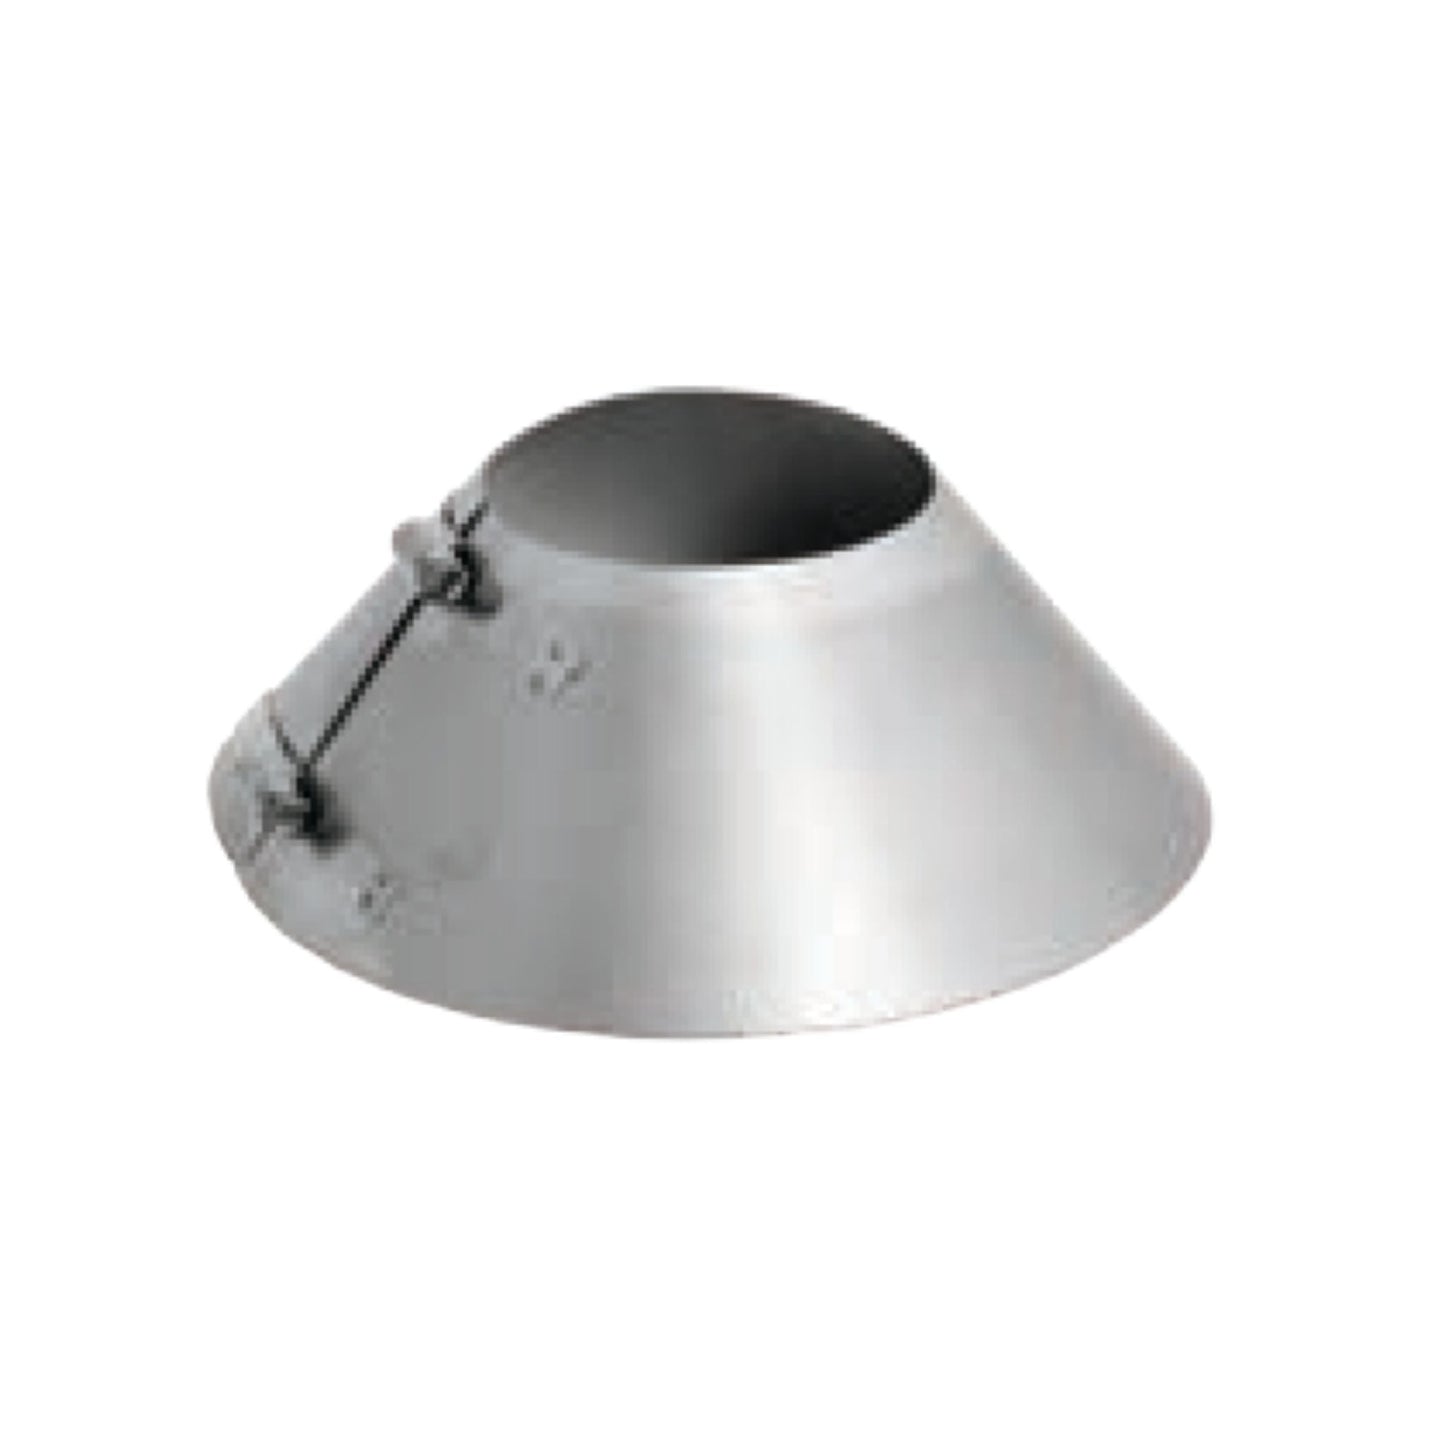 DuraVent FasNSeal 16" 29-4C Stainless Steel Storm Collar